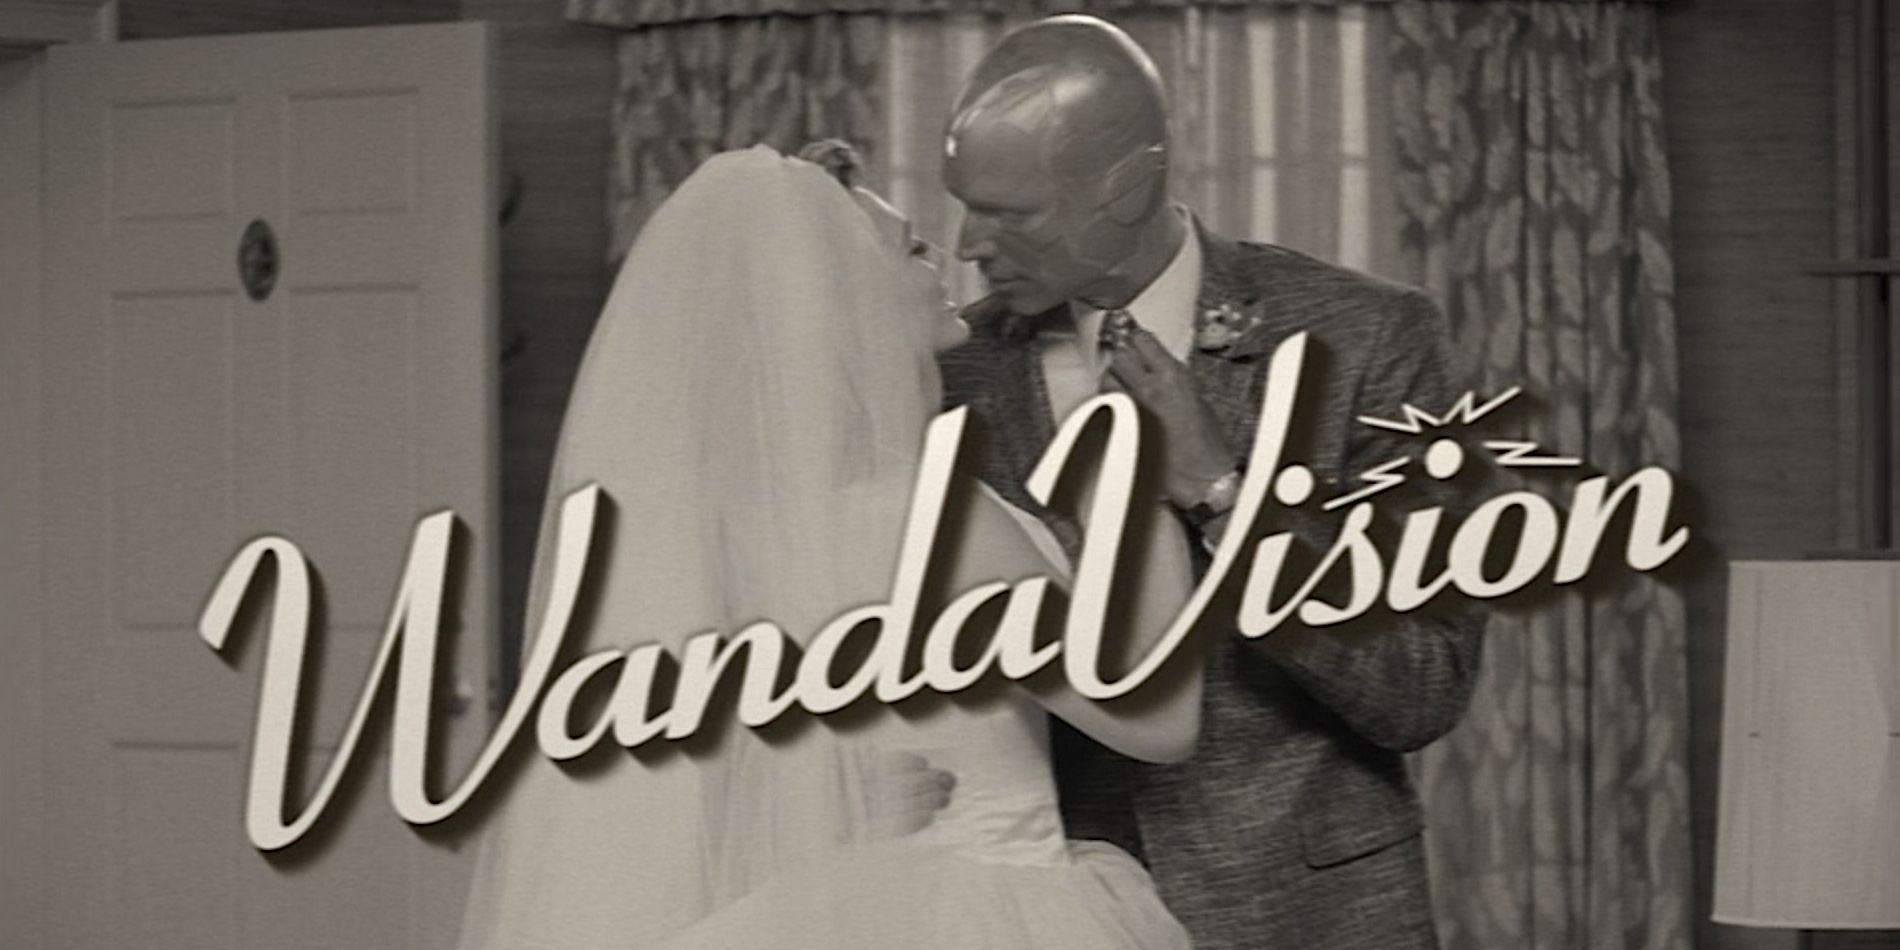 Wanda and Vision kissing, both dressed in traditional marriage attire. A title splash over the middle of the screen says &quot;WandaVision&quot;